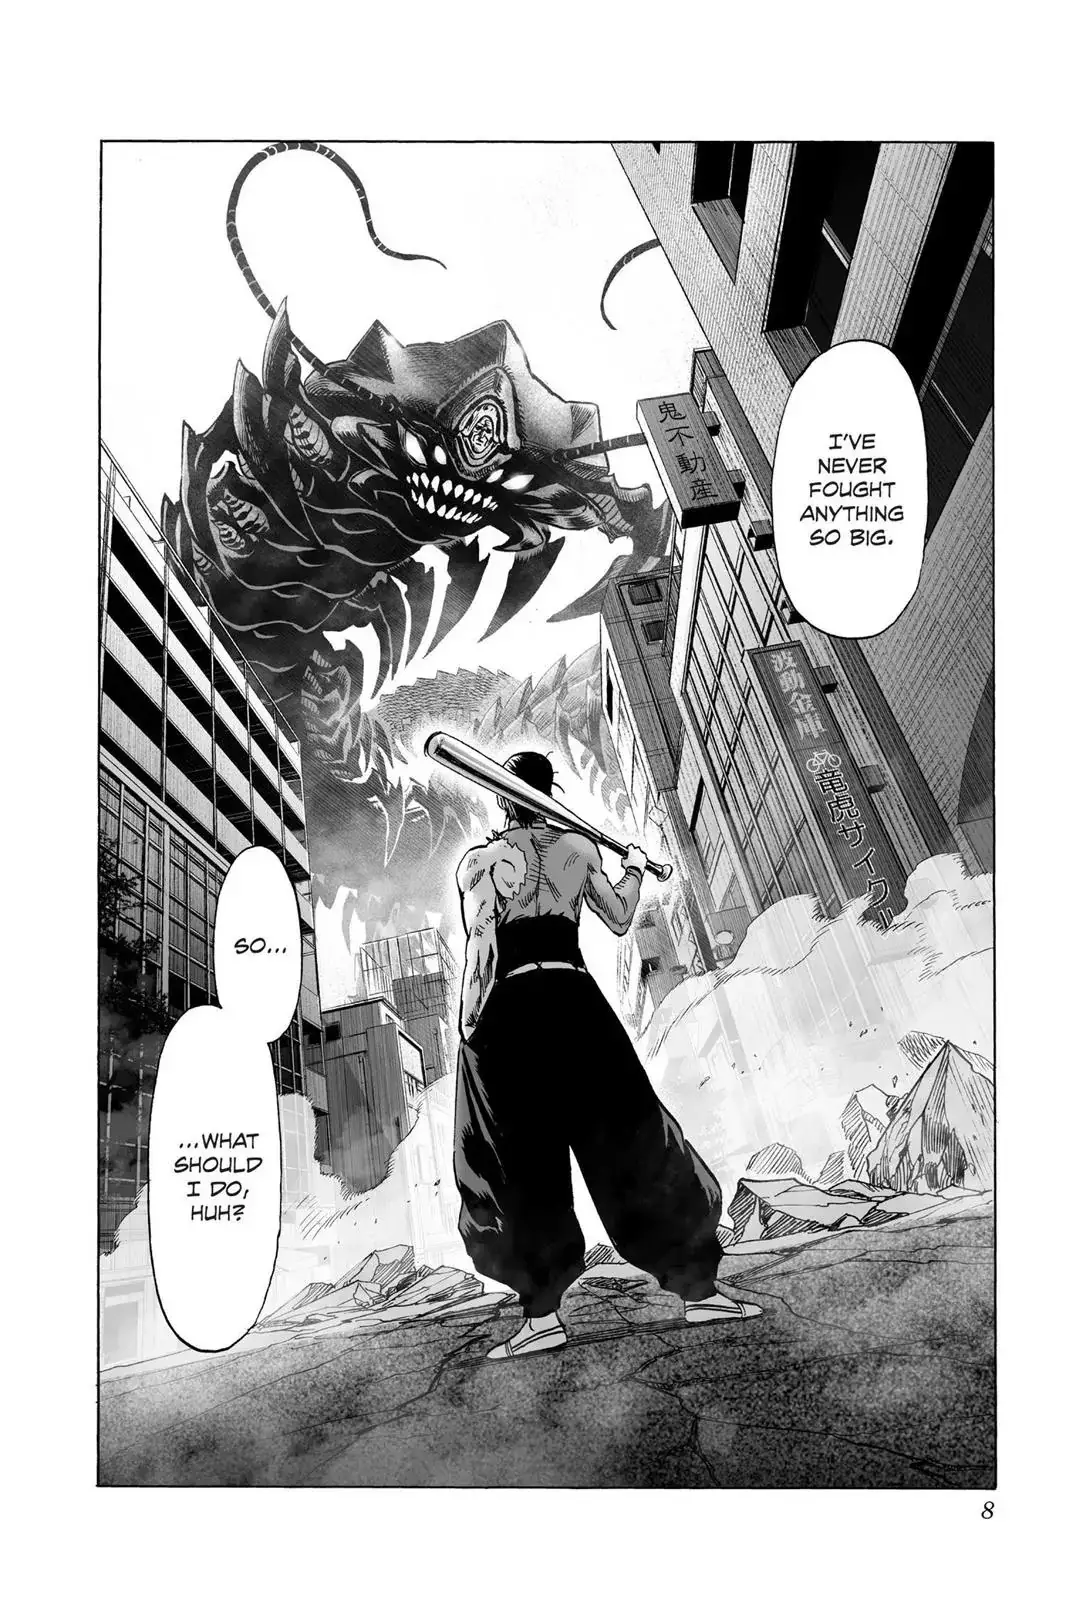 One Punch Man Chapter 56, READ One Punch Man Chapter 56 ONLINE, lost in the cloud genre,lost in the cloud gif,lost in the cloud girl,lost in the cloud goods,lost in the cloud goodreads,lost in the cloud,lost ark cloud gaming,lost odyssey cloud gaming,lost in the cloud fanart,lost in the cloud fanfic,lost in the cloud fandom,lost in the cloud first kiss,lost in the cloud font,lost in the cloud ending,lost in the cloud episode 97,lost in the cloud edit,lost in the cloud explained,lost in the cloud dog,lost in the cloud discord server,lost in the cloud desktop wallpaper,lost in the cloud drawing,can't find my cloud on network,lost in the cloud characters,lost in the cloud chapter 93 release date,lost in the cloud birthday,lost in the cloud birthday art,lost in the cloud background,lost in the cloud banner,lost in the clouds meaning,what is the black cloud in lost,lost in the cloud ao3,lost in the cloud anime,lost in the cloud art,lost in the cloud author twitter,lost in the cloud author instagram,lost in the cloud artist,lost in the cloud acrylic stand,lost in the cloud artist twitter,lost in the cloud art style,lost in the cloud analysis